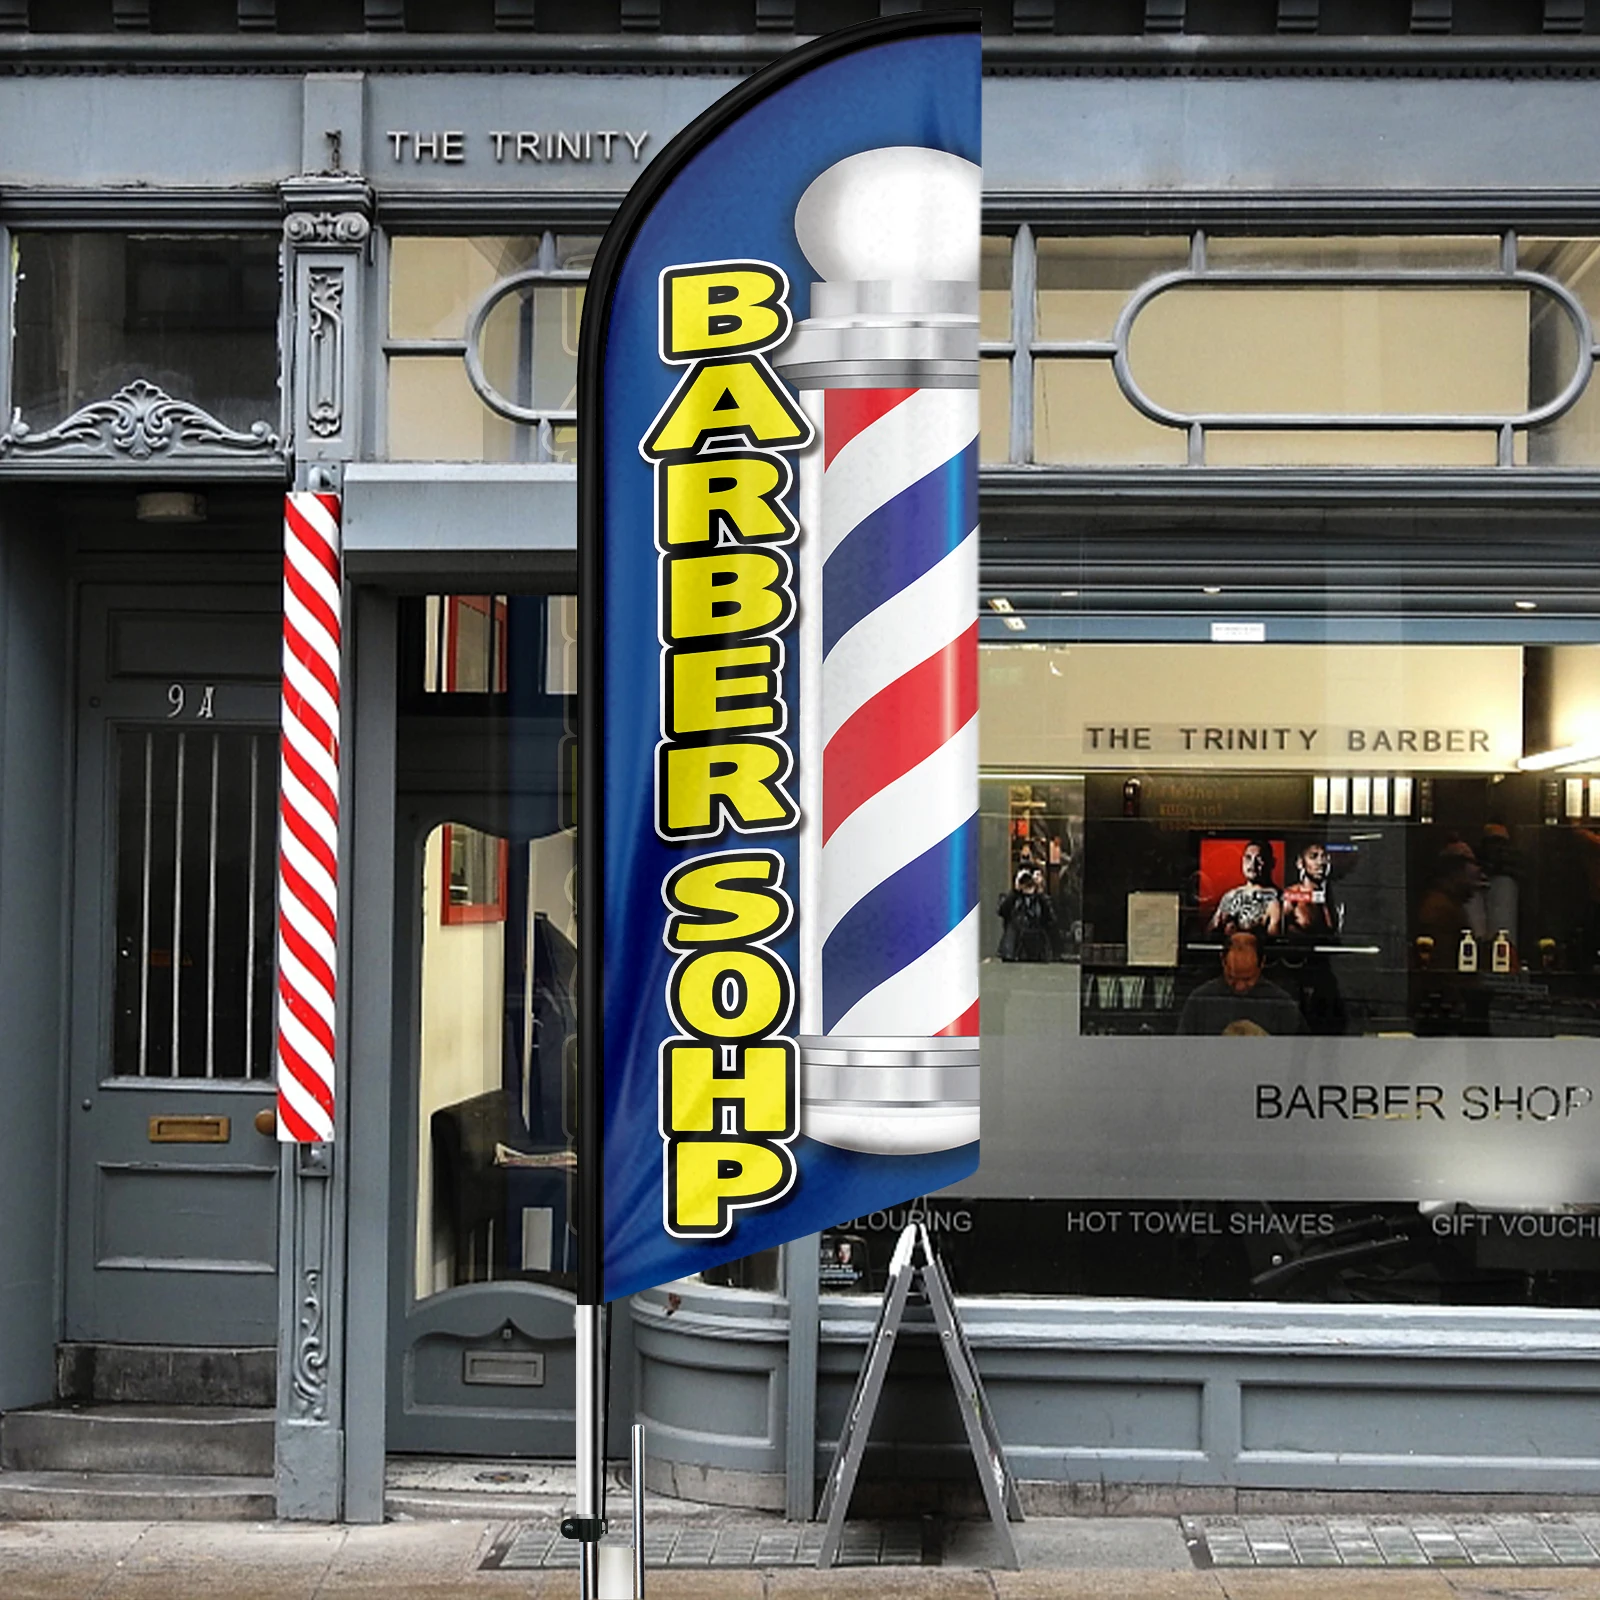 

Barber Shop Outdoor Advertising Flying Feather Flag Set Haircut Swooper Printed Banner Decoration 8.2Ft✖2.1Ft Carry Bag Sale Now